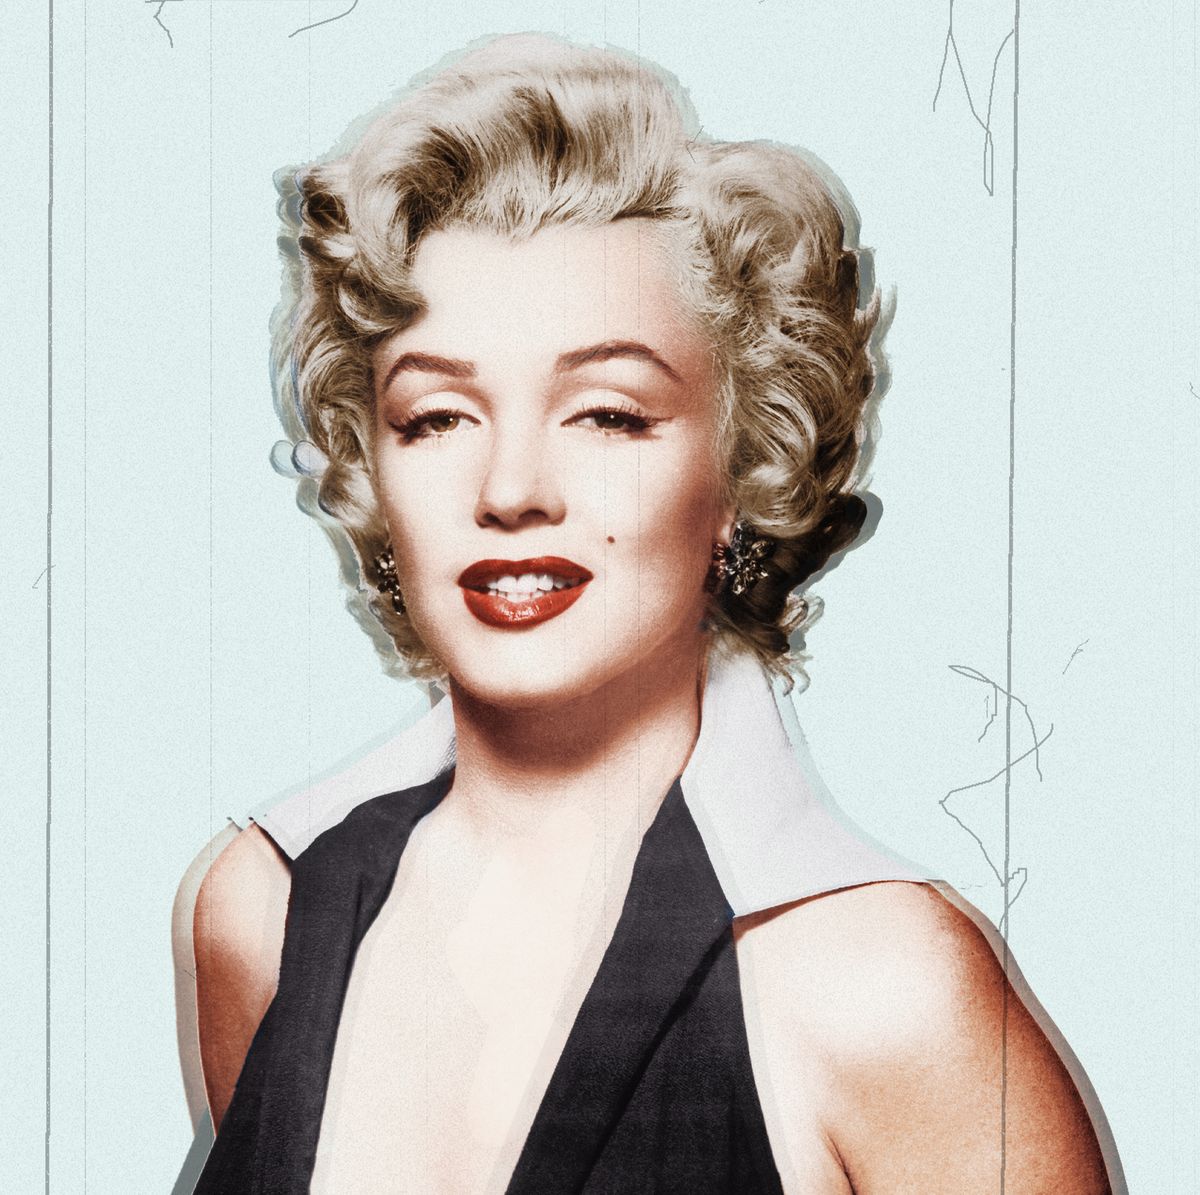 Listen to Marilyn Monroe talk about Chanel No. 5 - Telegraph